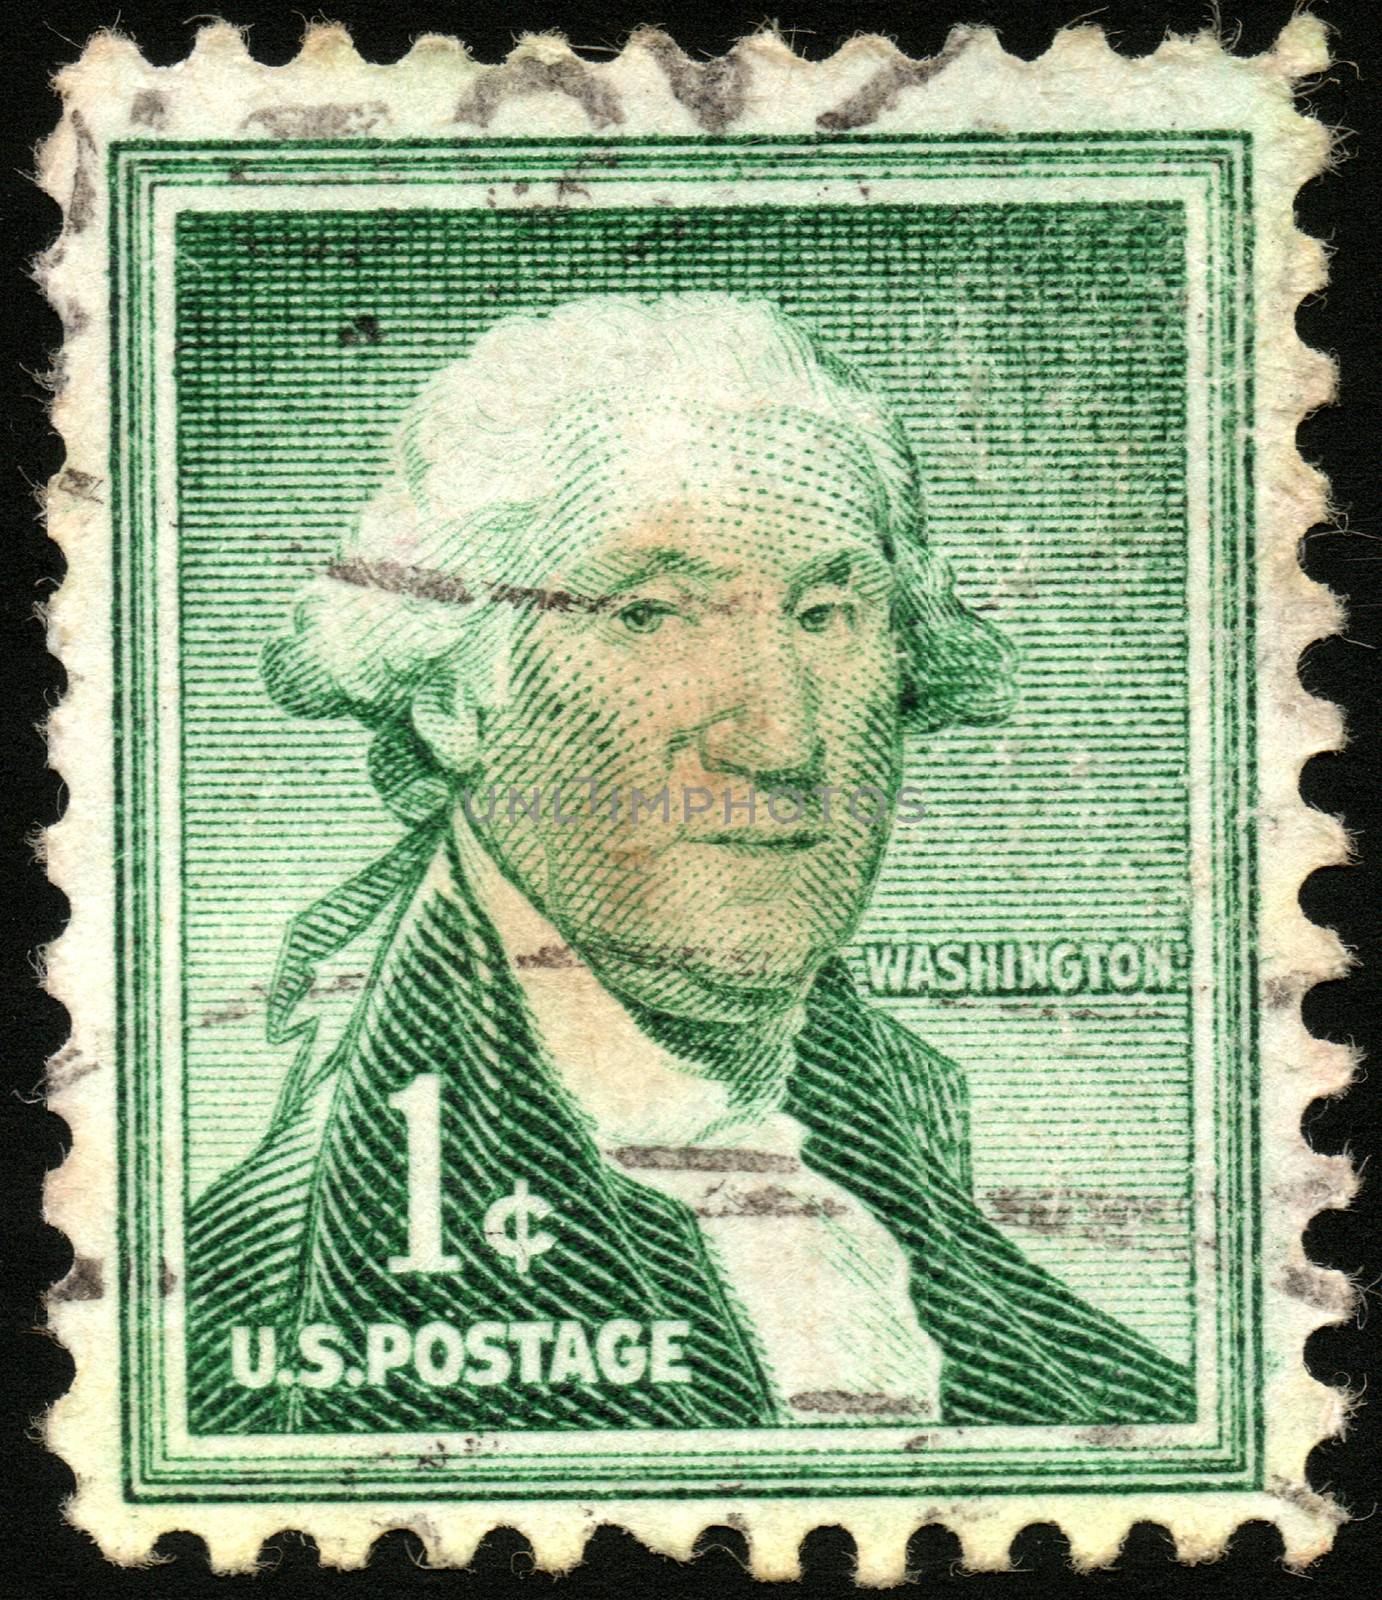 USA - CIRCA-1954: A stamp printed in USA shows a picture of George Washington - circa 1954